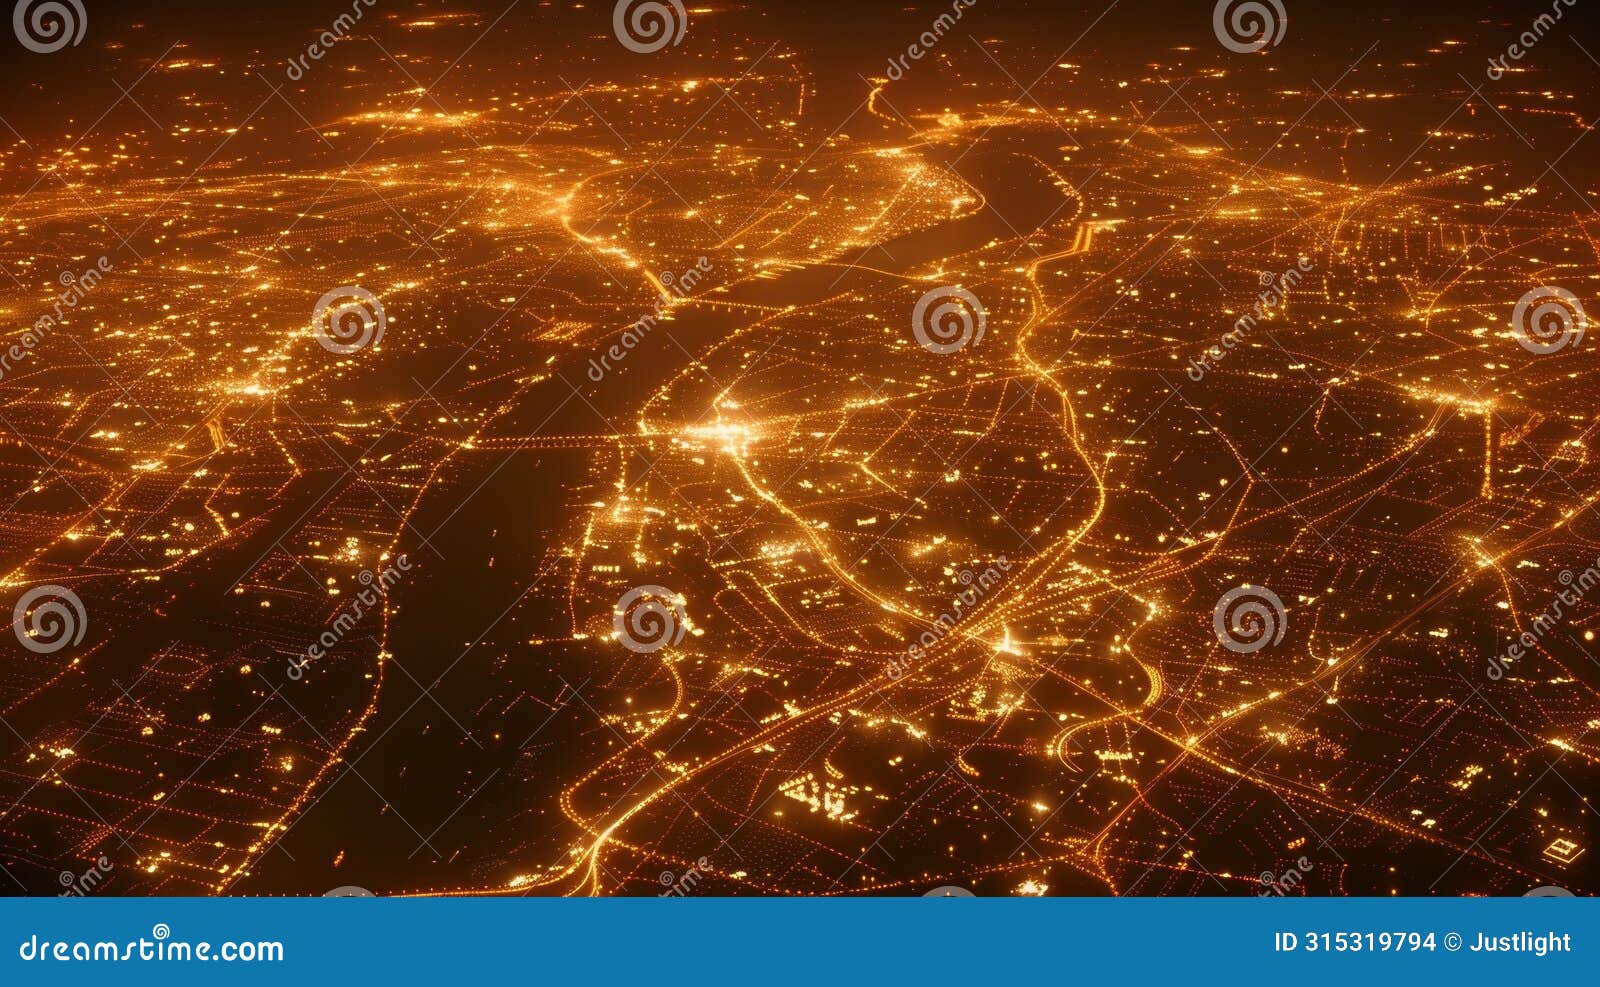 with the citys bright lights out of focus the rivers and highways appear as a web of glowing pathways leading towards